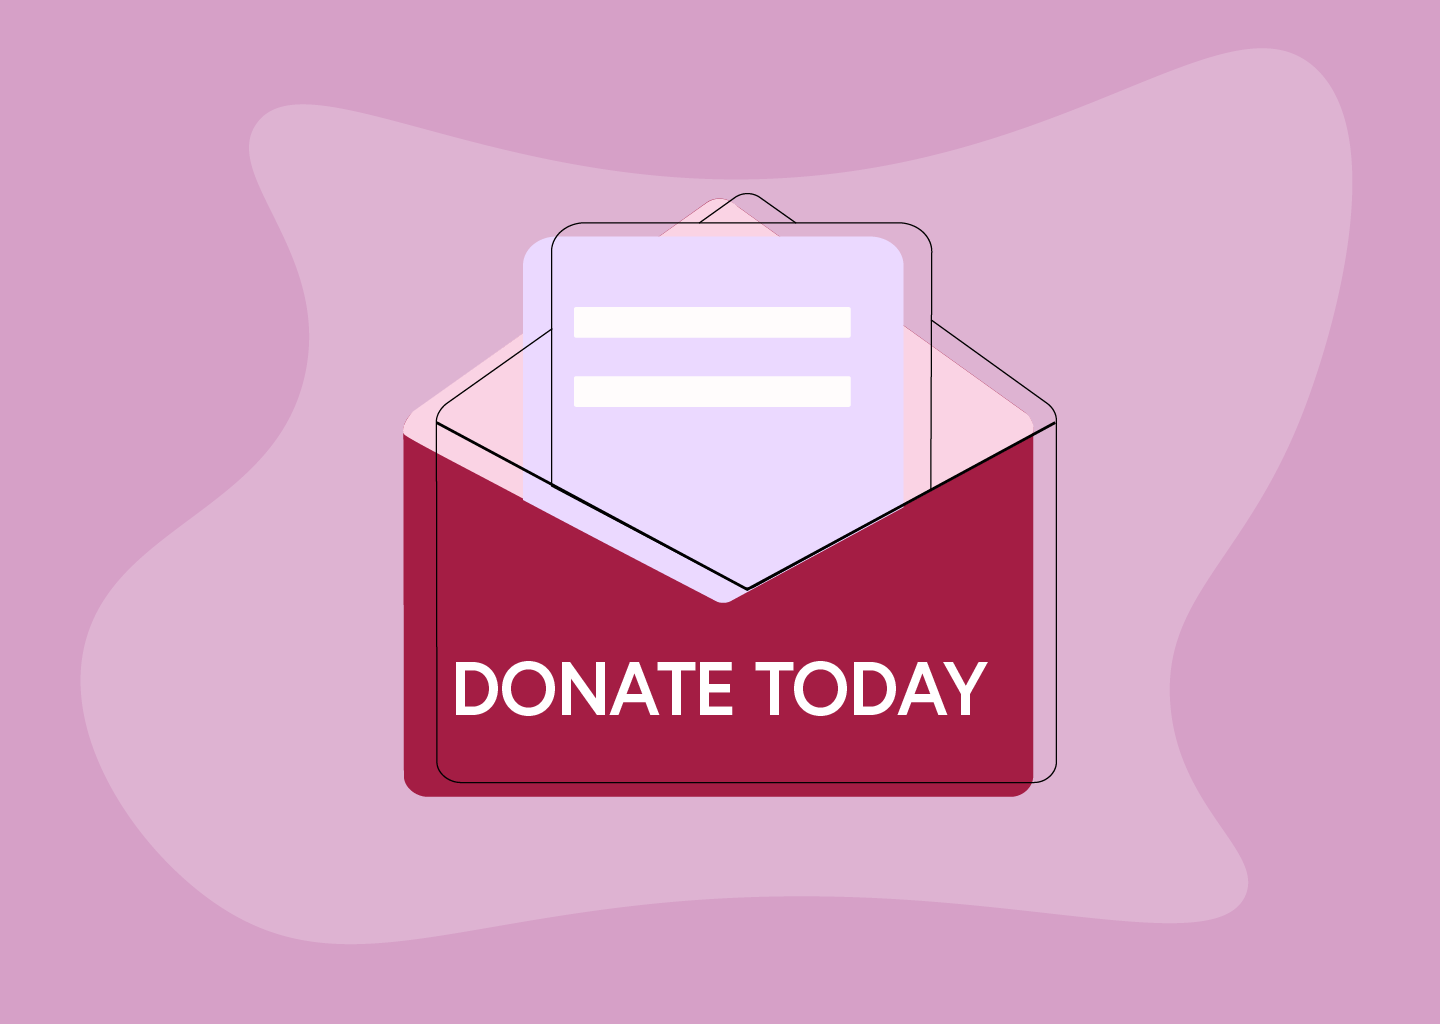 10 Tips for Nonprofit Direct Mail Fundraising During COVID-19